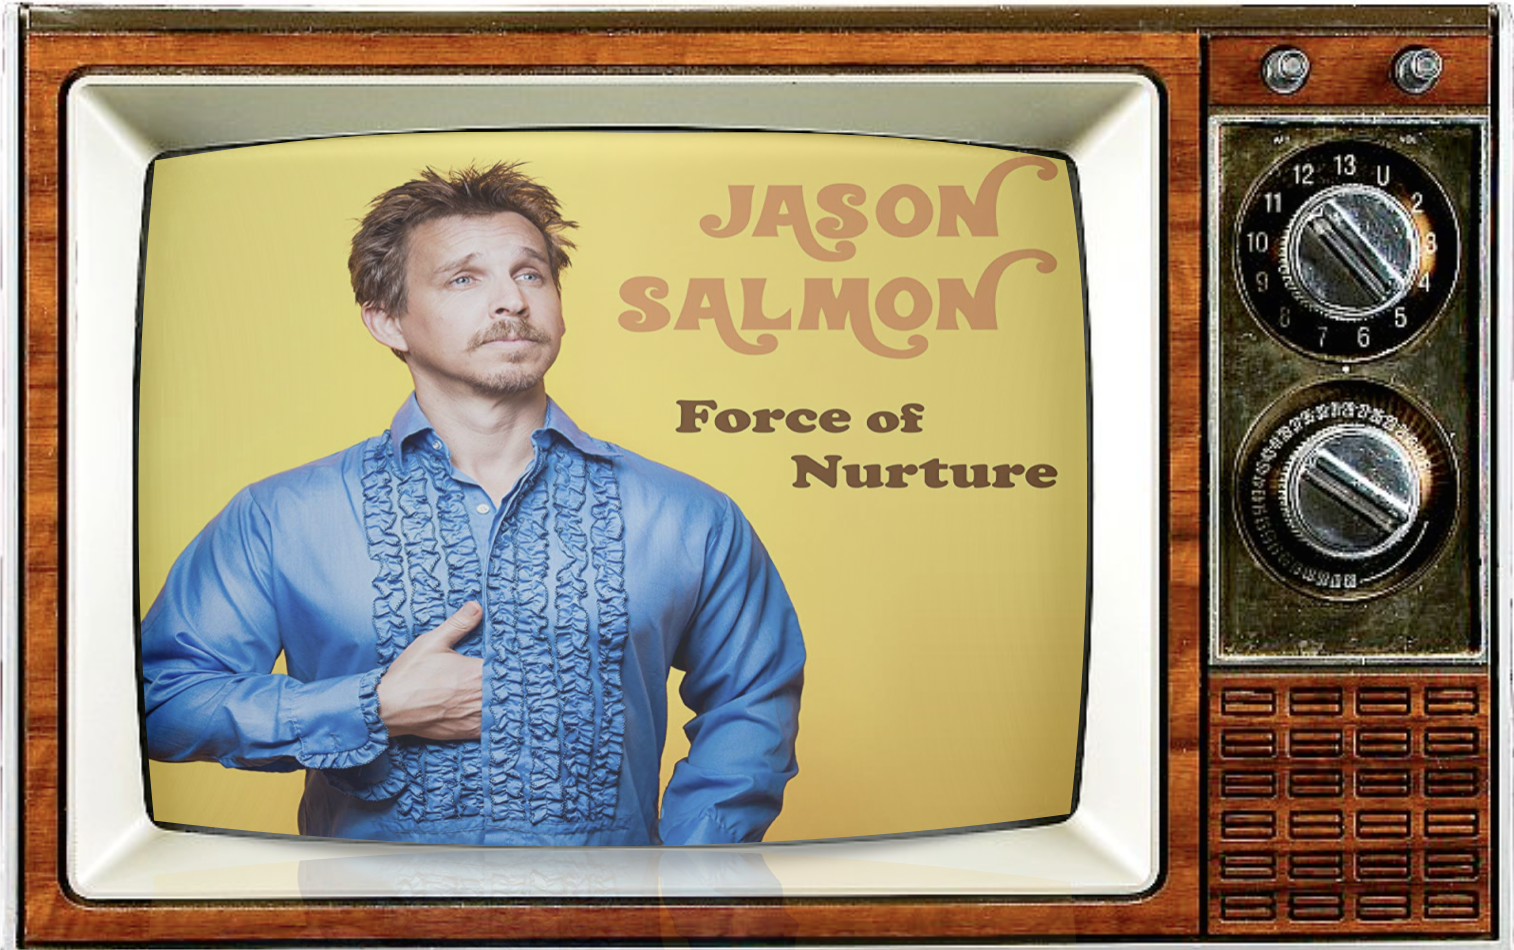 SMC Episode 73: Comedy, It’s No Laughing Matter – With (actually funny!) Comedian Jason Salmon